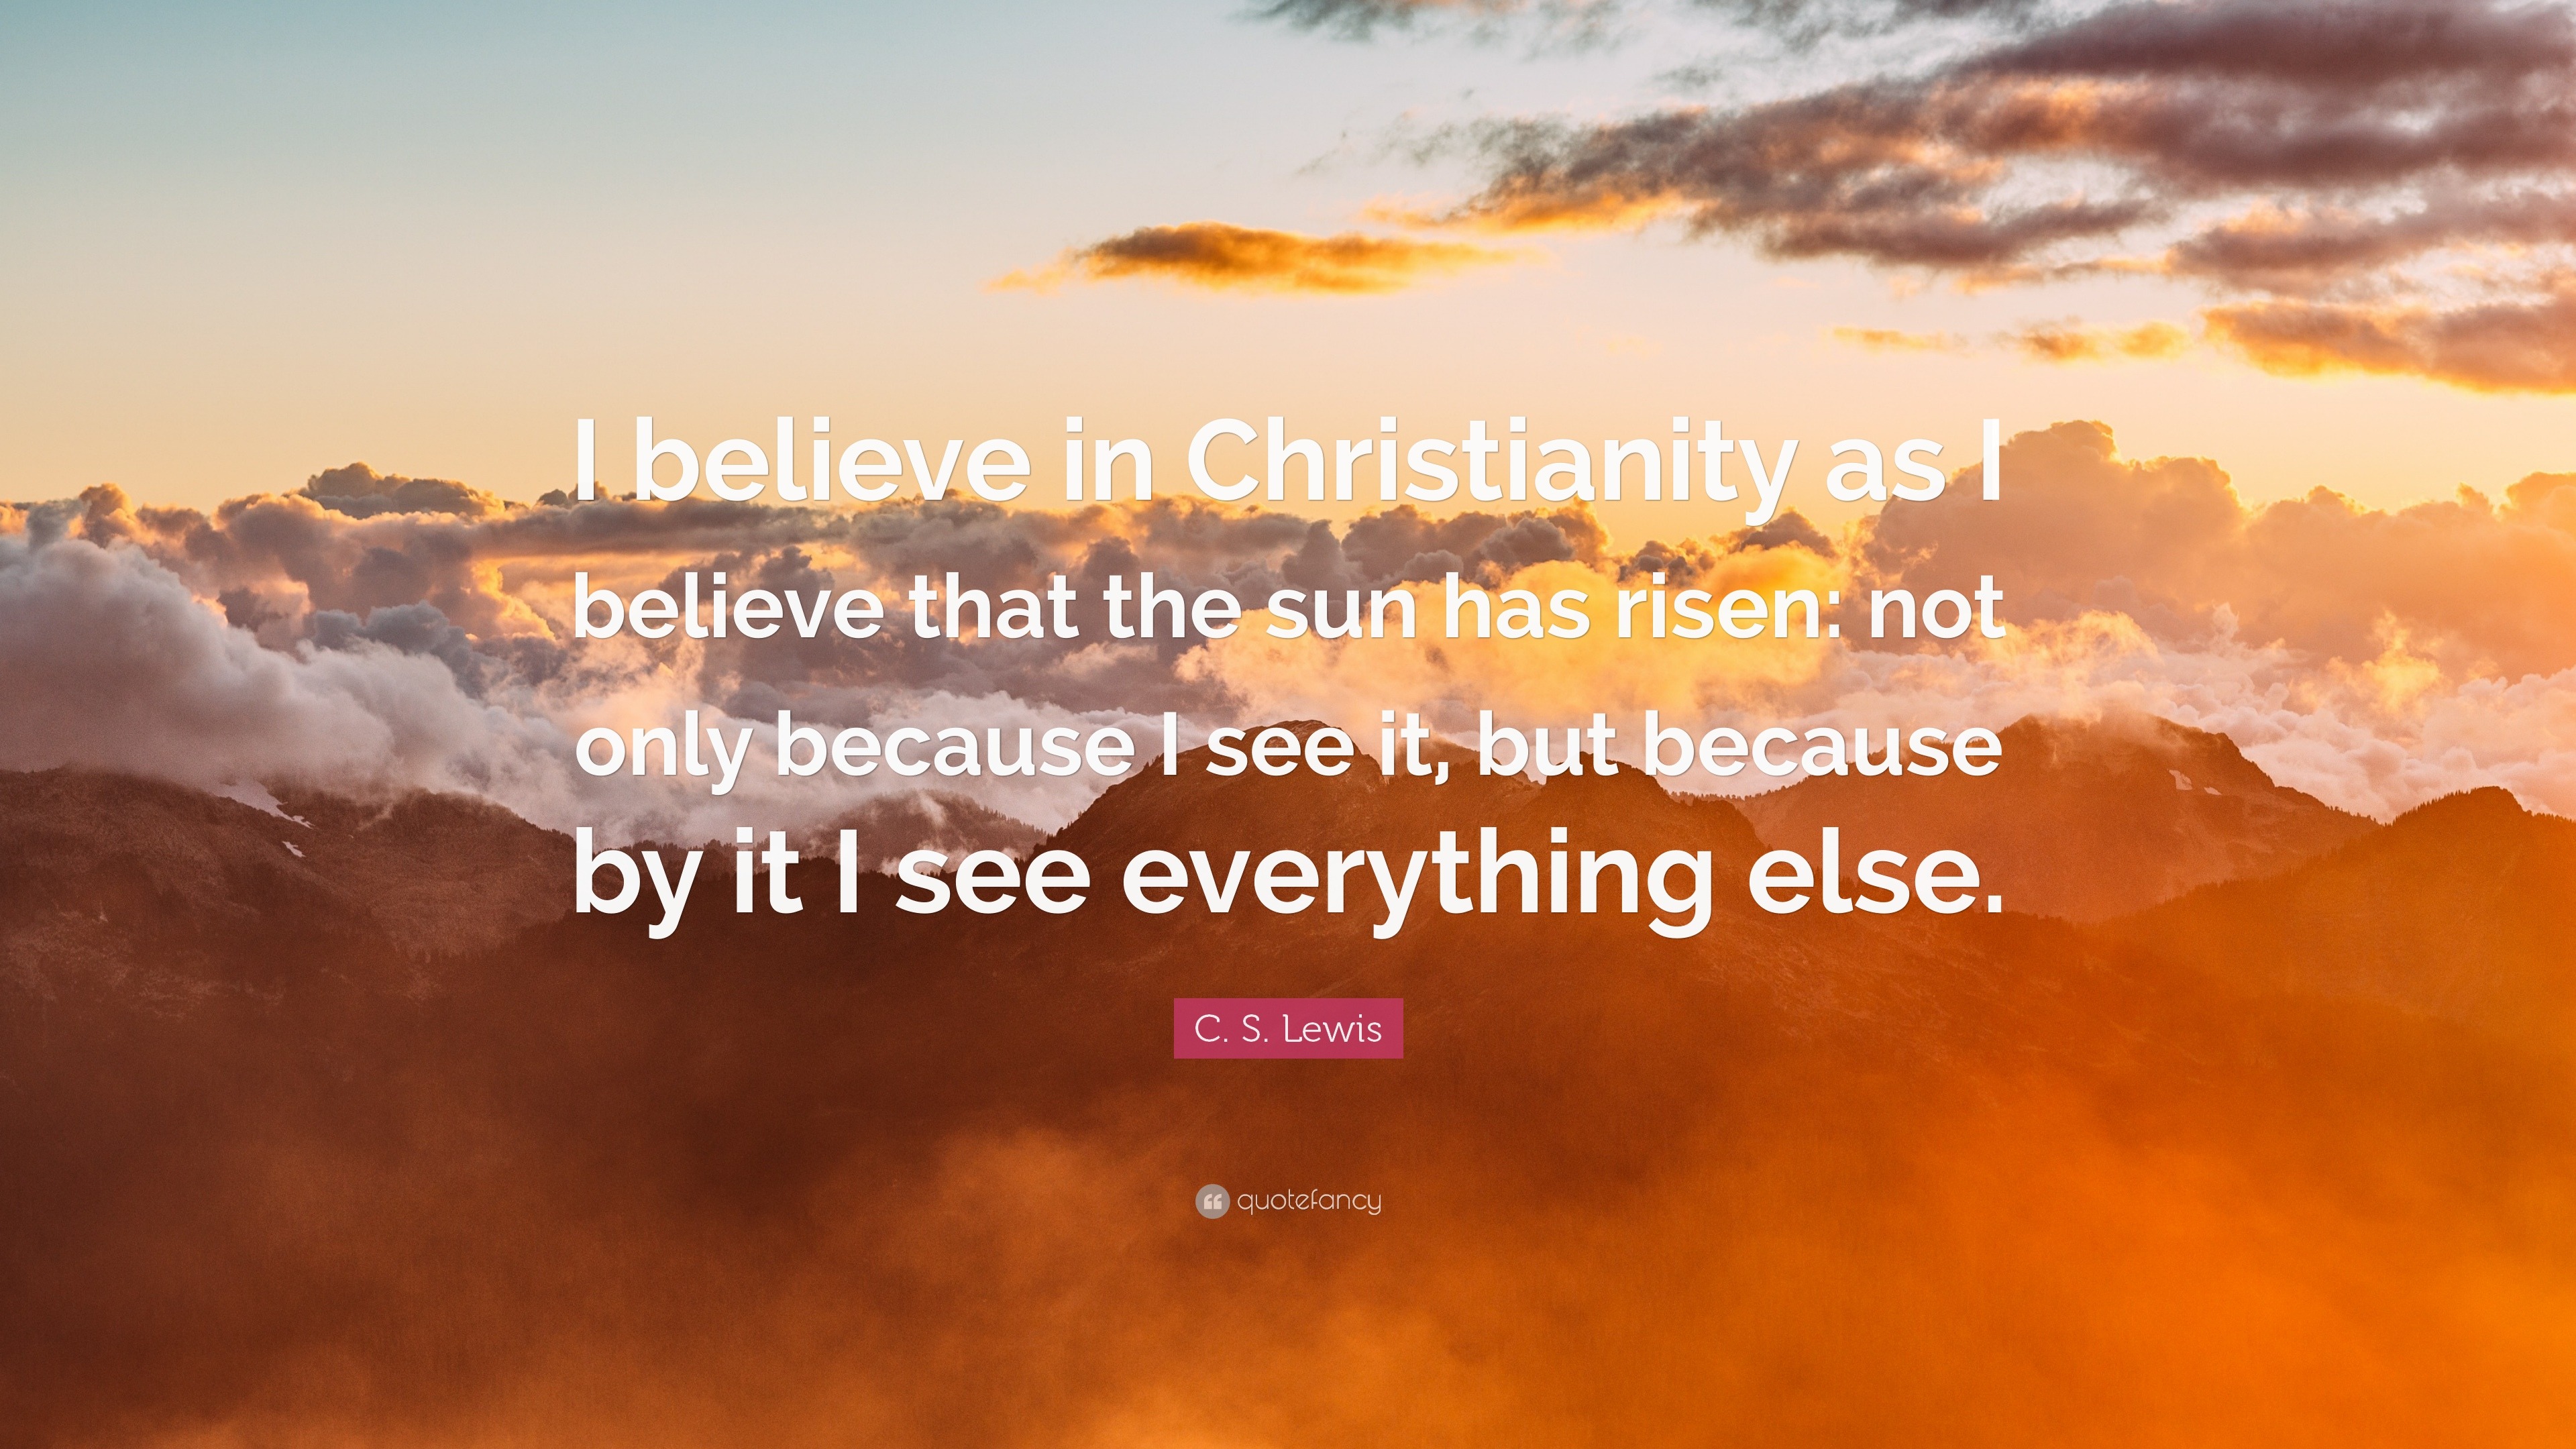 C. S. Lewis Quote: “I believe in Christianity as I believe that the sun